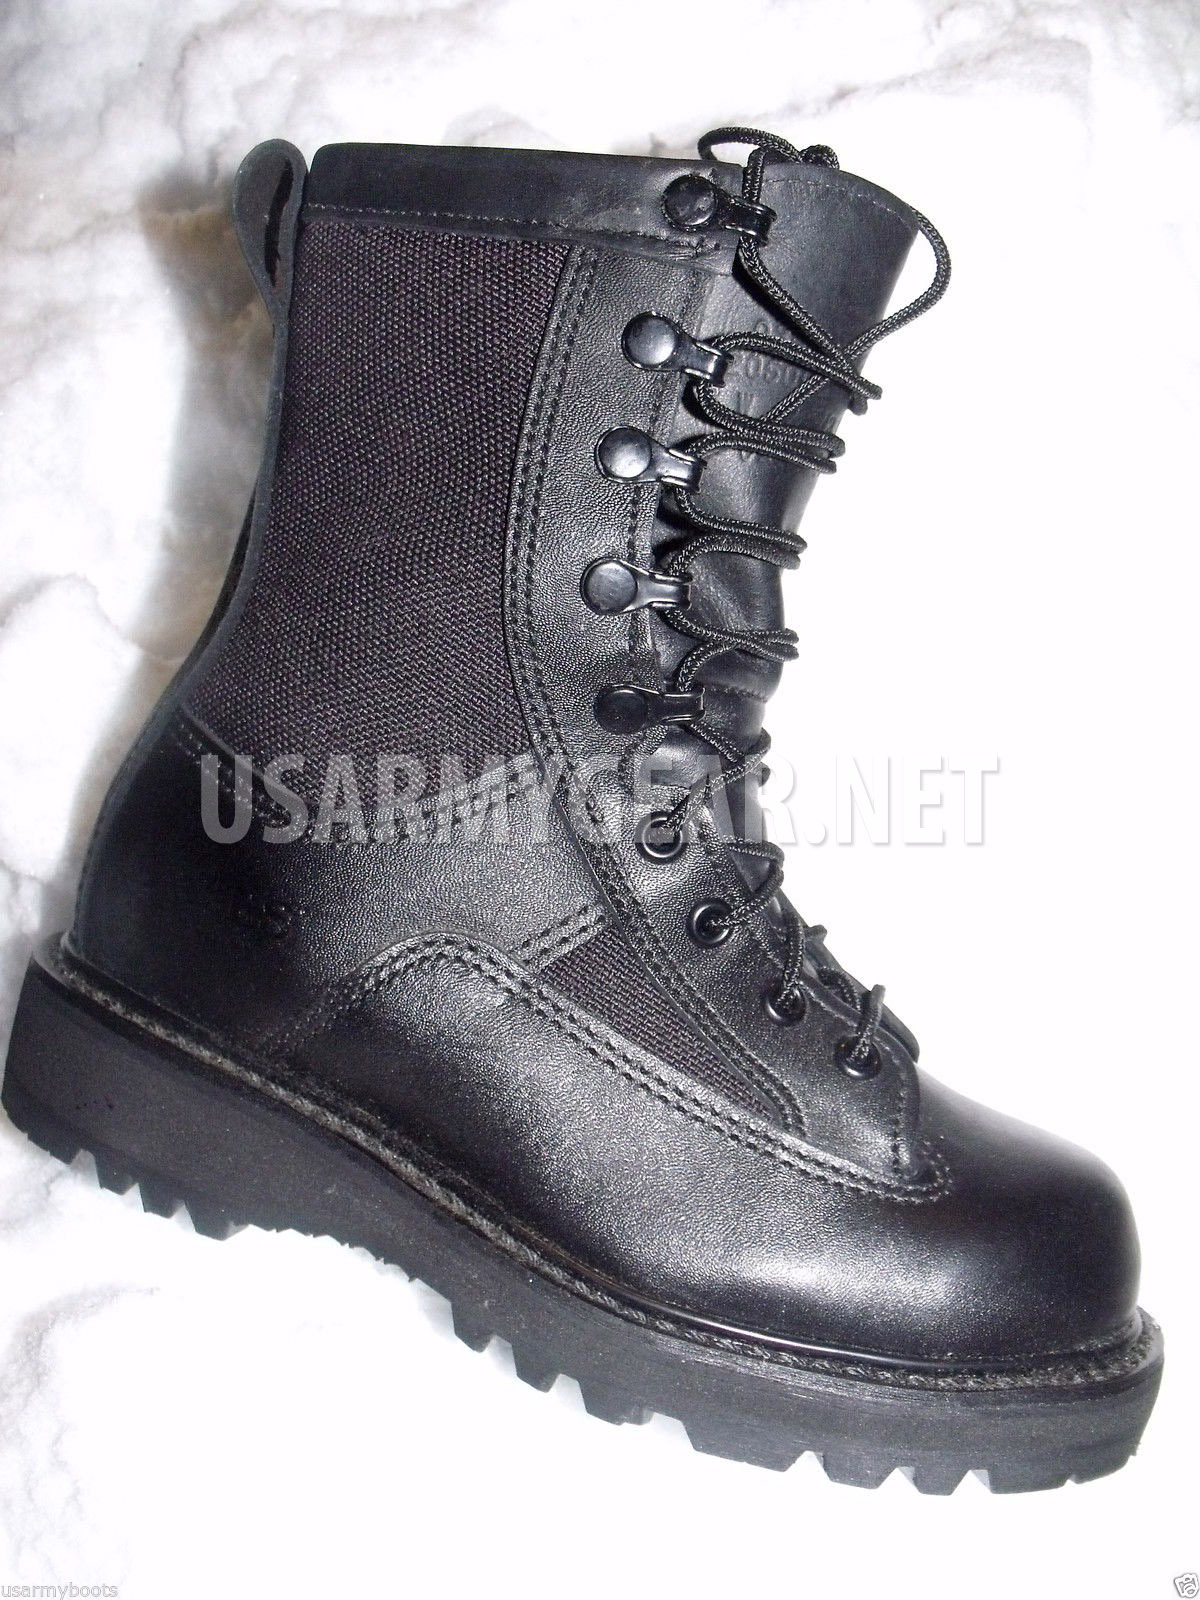 Wellco US Army Hot Youth Kids Boys Military GORETEX WATERPROOF LEATHER Boots 5.5